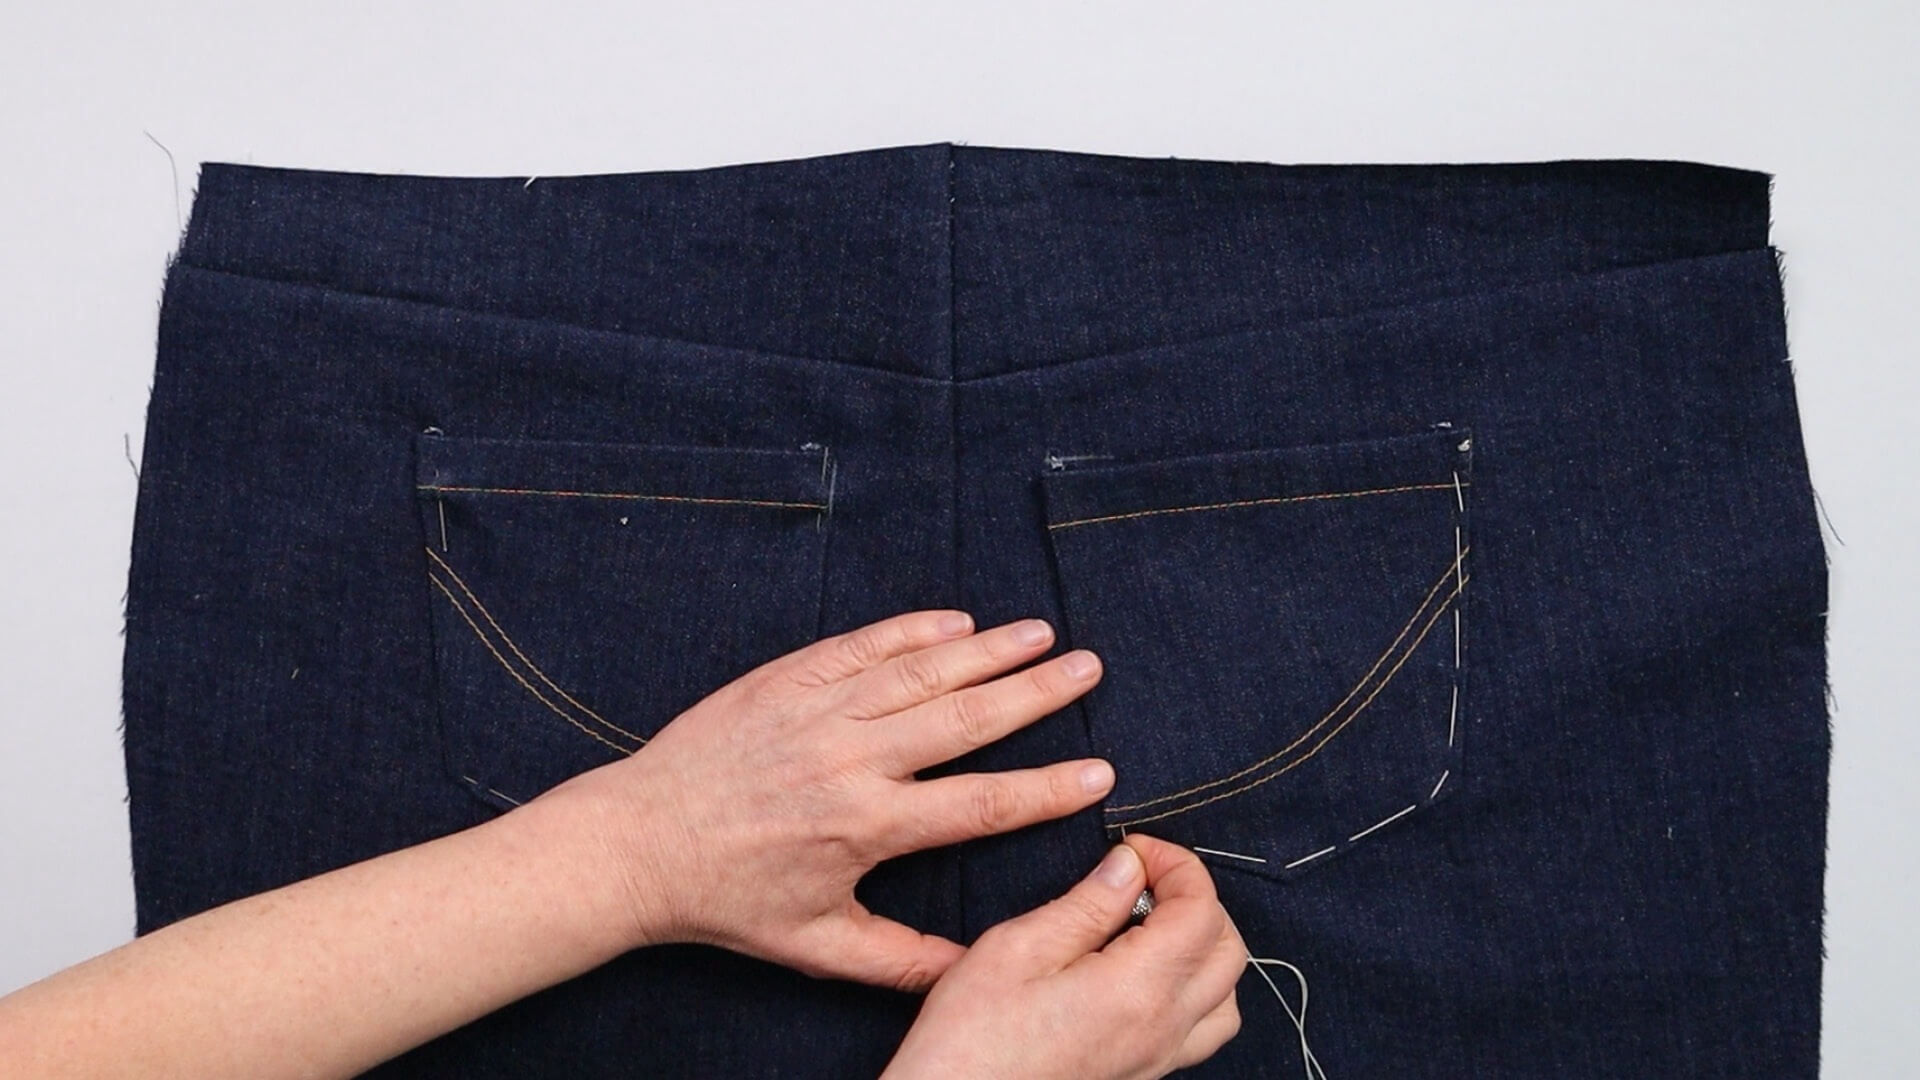 smartPATTERN sewing instructions for preparing a pair of jeans for fitting - pin or baste on back pockets